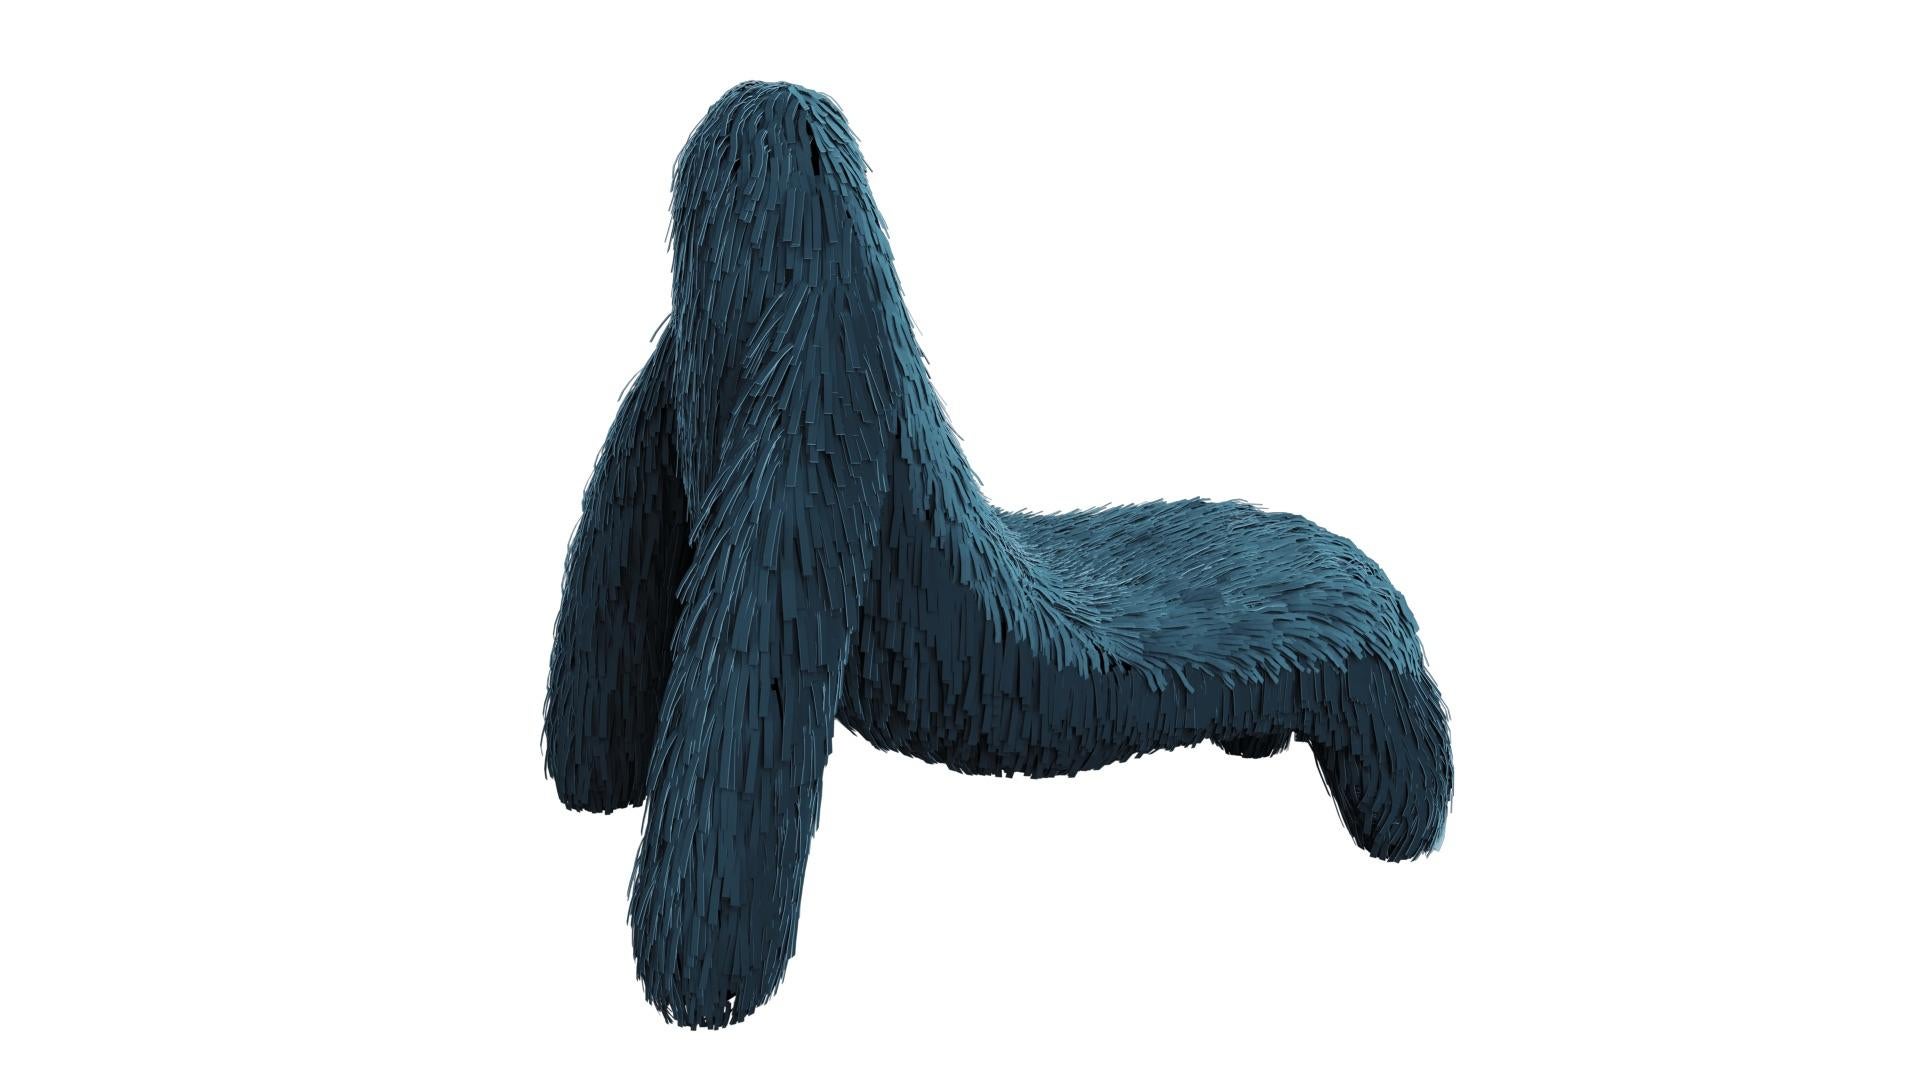 Gorilla chair with real blue green leather by Marcantonio is an ape shaped seat with a rich blue and green leather covering. A lounge chair with a fantastic, unique shape

For his debut creations, Marcantonio introduced “Vegetal Animal”, a concept